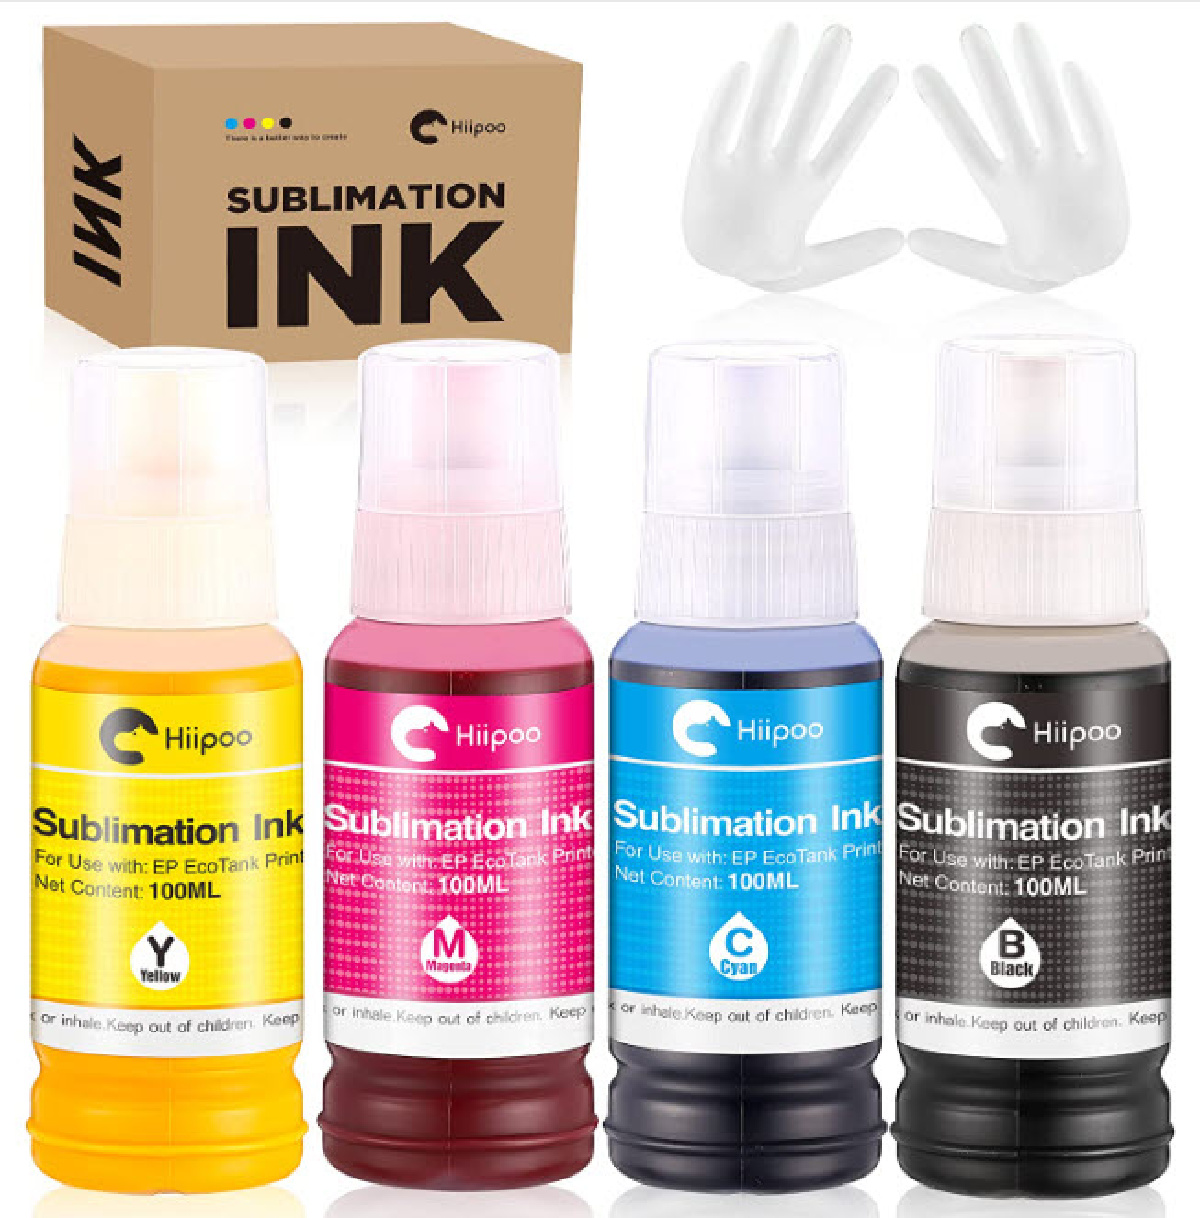 image of 4 bottles of Hiipoo sublimation ink with prefect tops